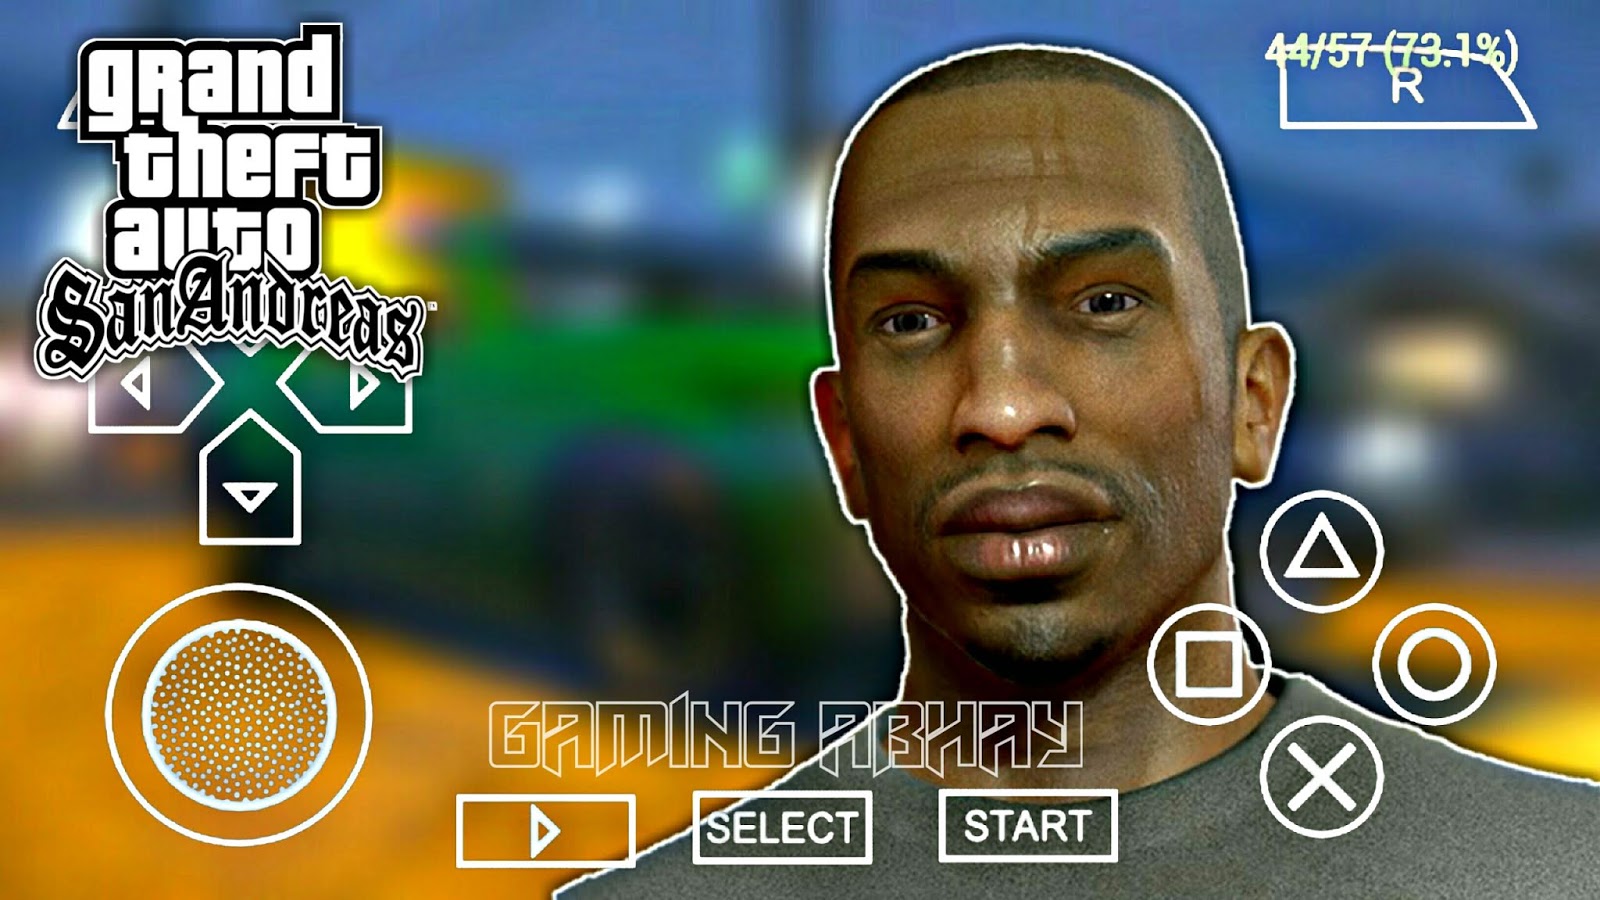 Gta san andreas zip file for android ppsspp